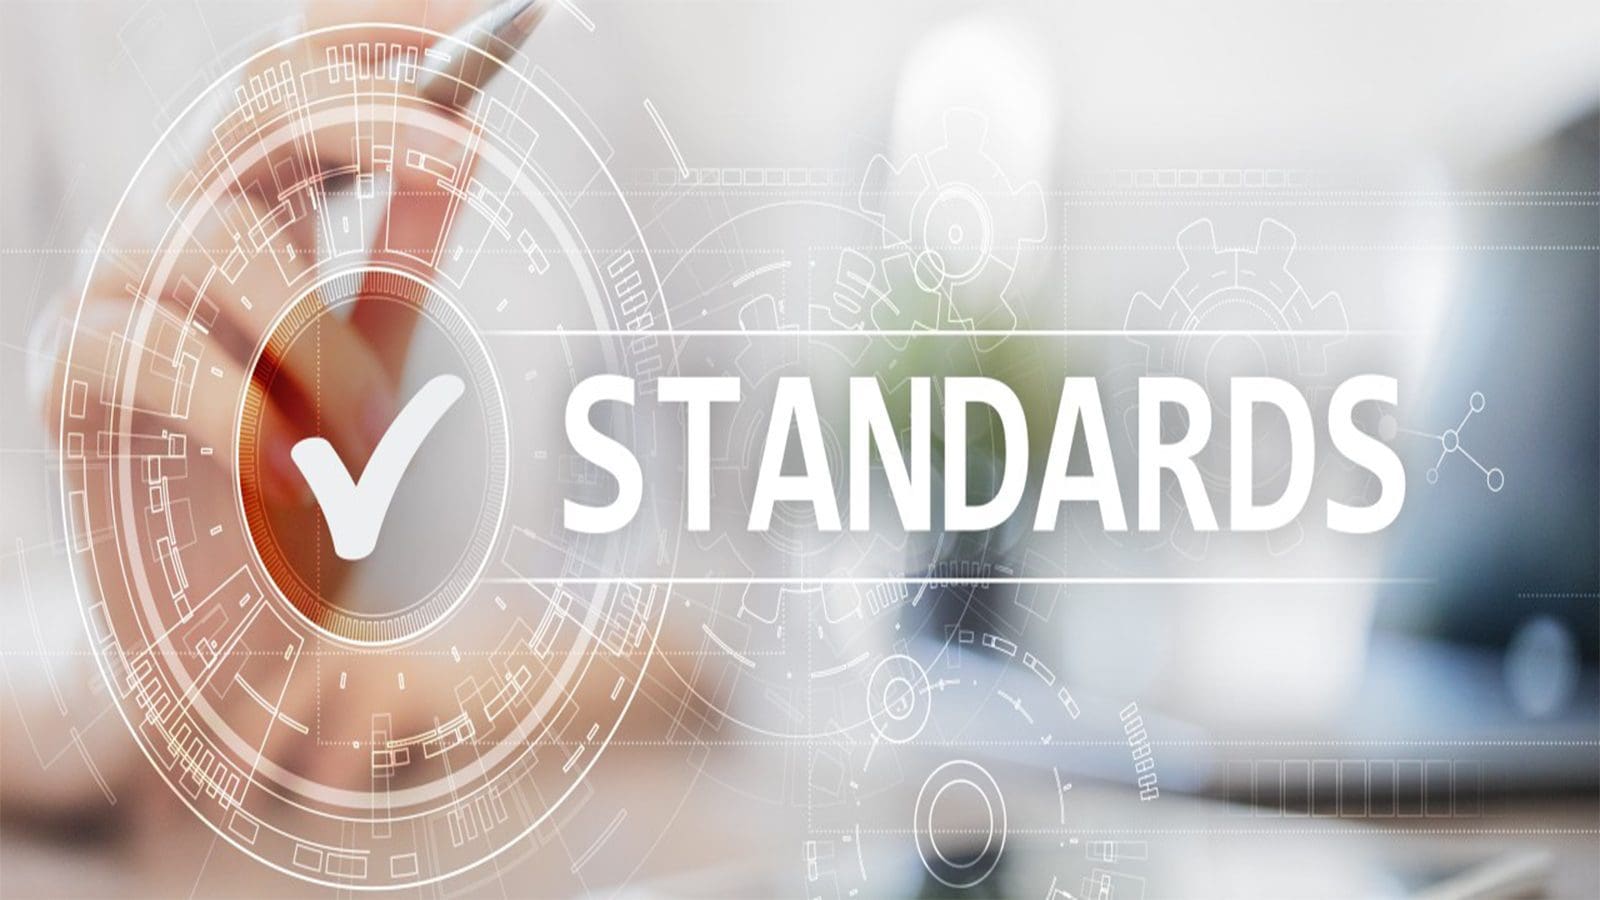 UK Food Standards Agency partners with CTSI to equip professionals with food, trading standards skills